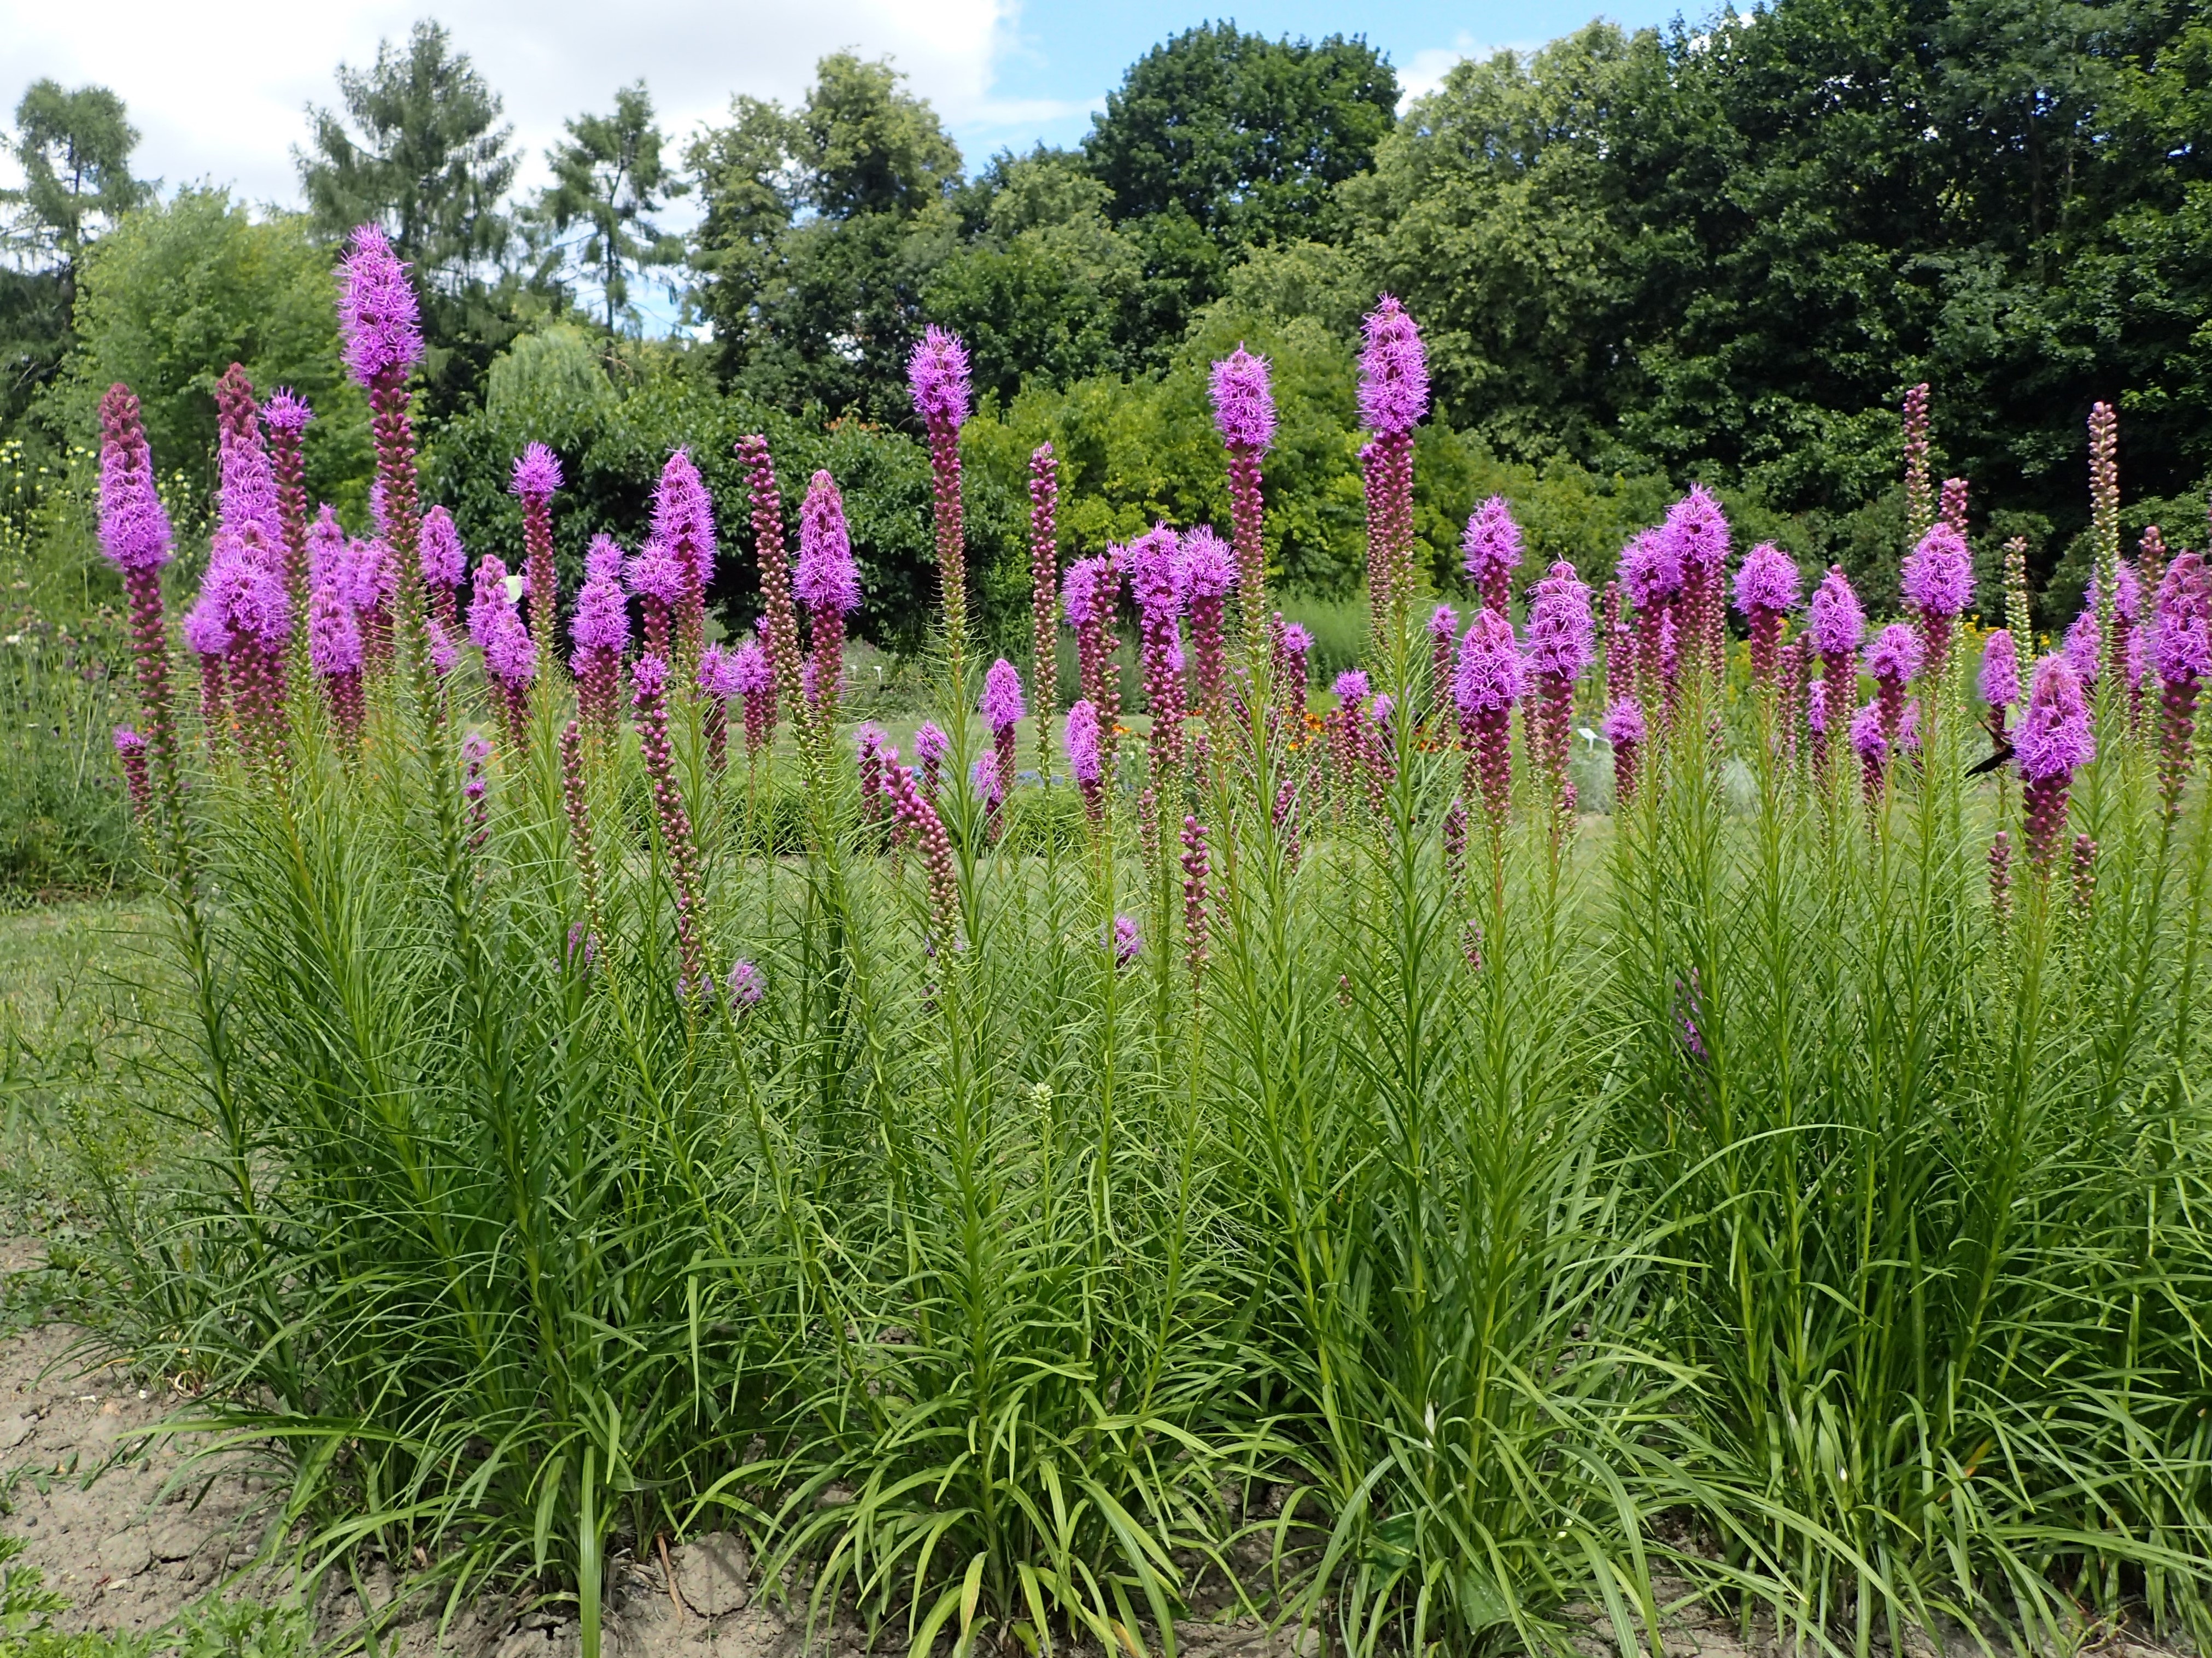 A patch of liatris spicata Blazingstar plant with their purple flowers in glorious full bloom